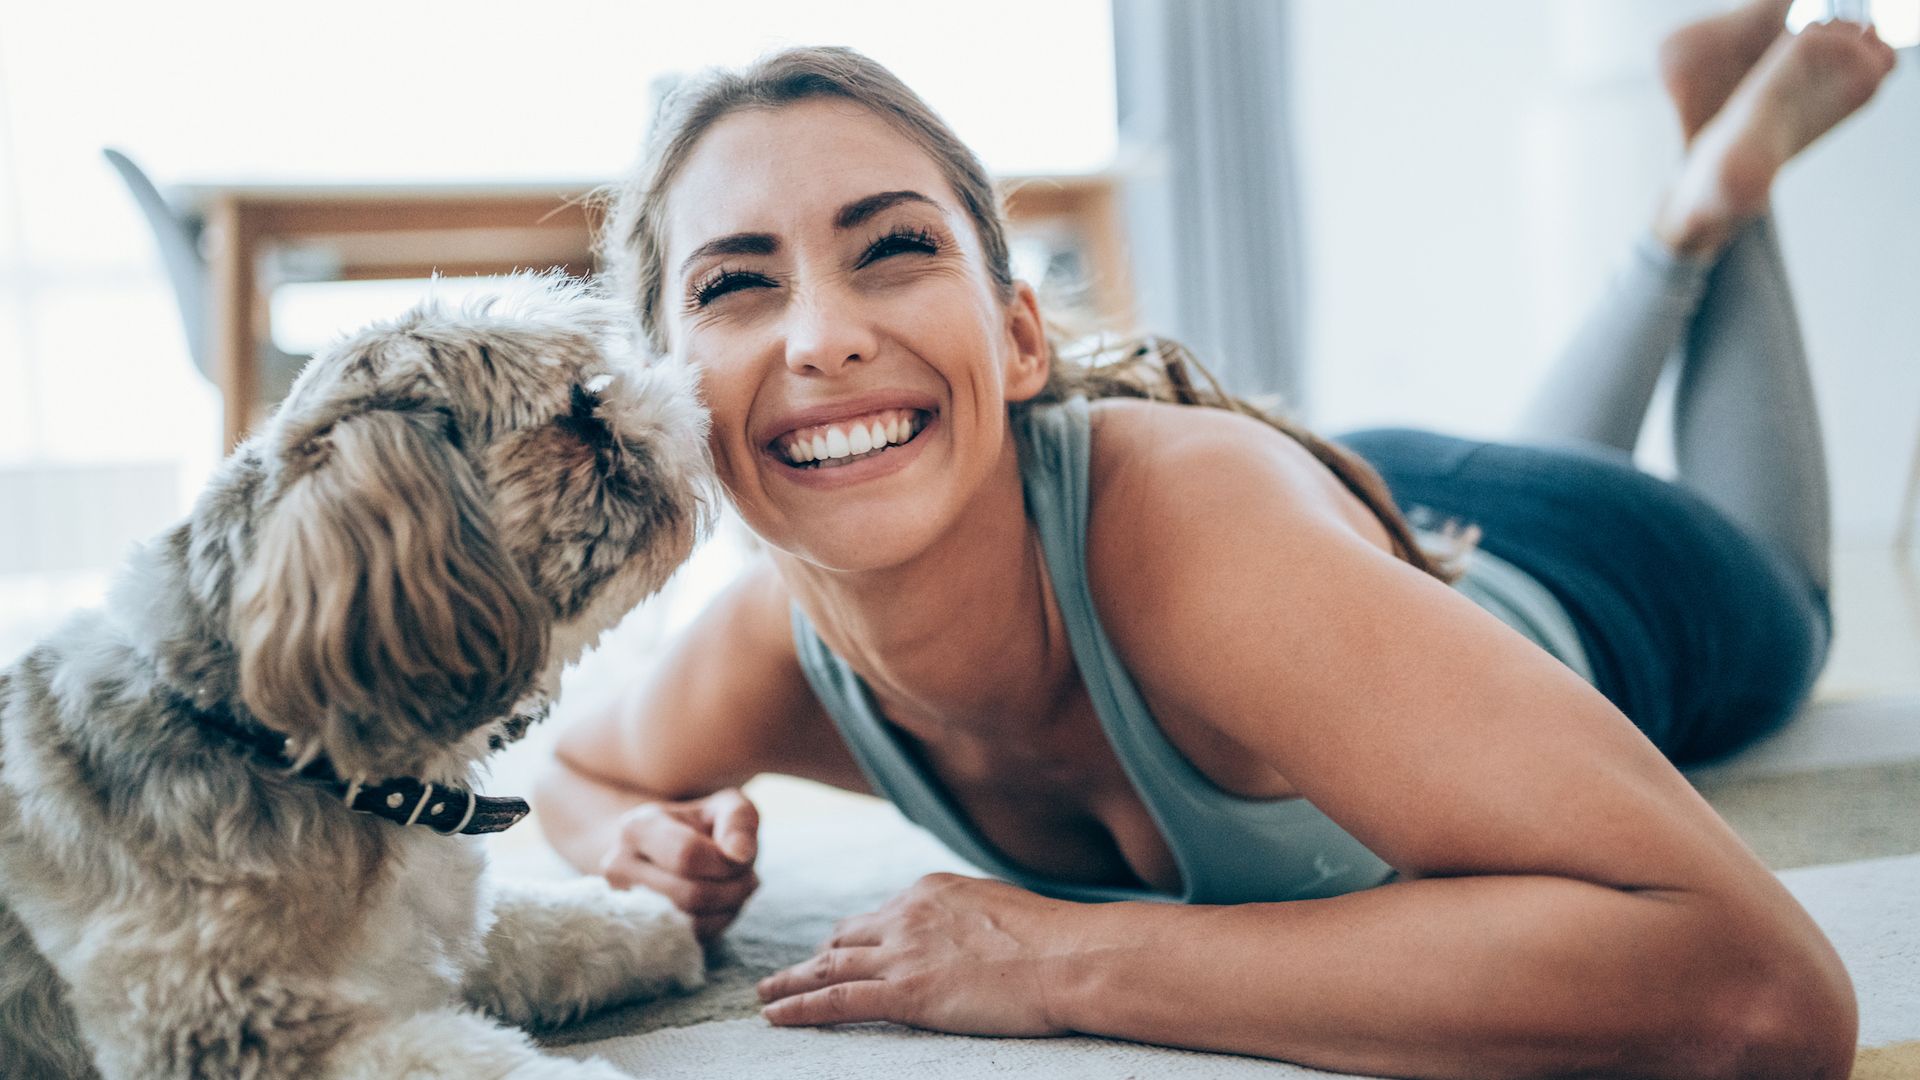 <p>                     A study conducted by the Dog’s Trust (the UK’s leading dog welfare charity) found that 60% of the 700 surveyed people said that owning a dog can make others more attractive. Eight-five percent think people are more approachable when they have a dog in tow.                   </p>